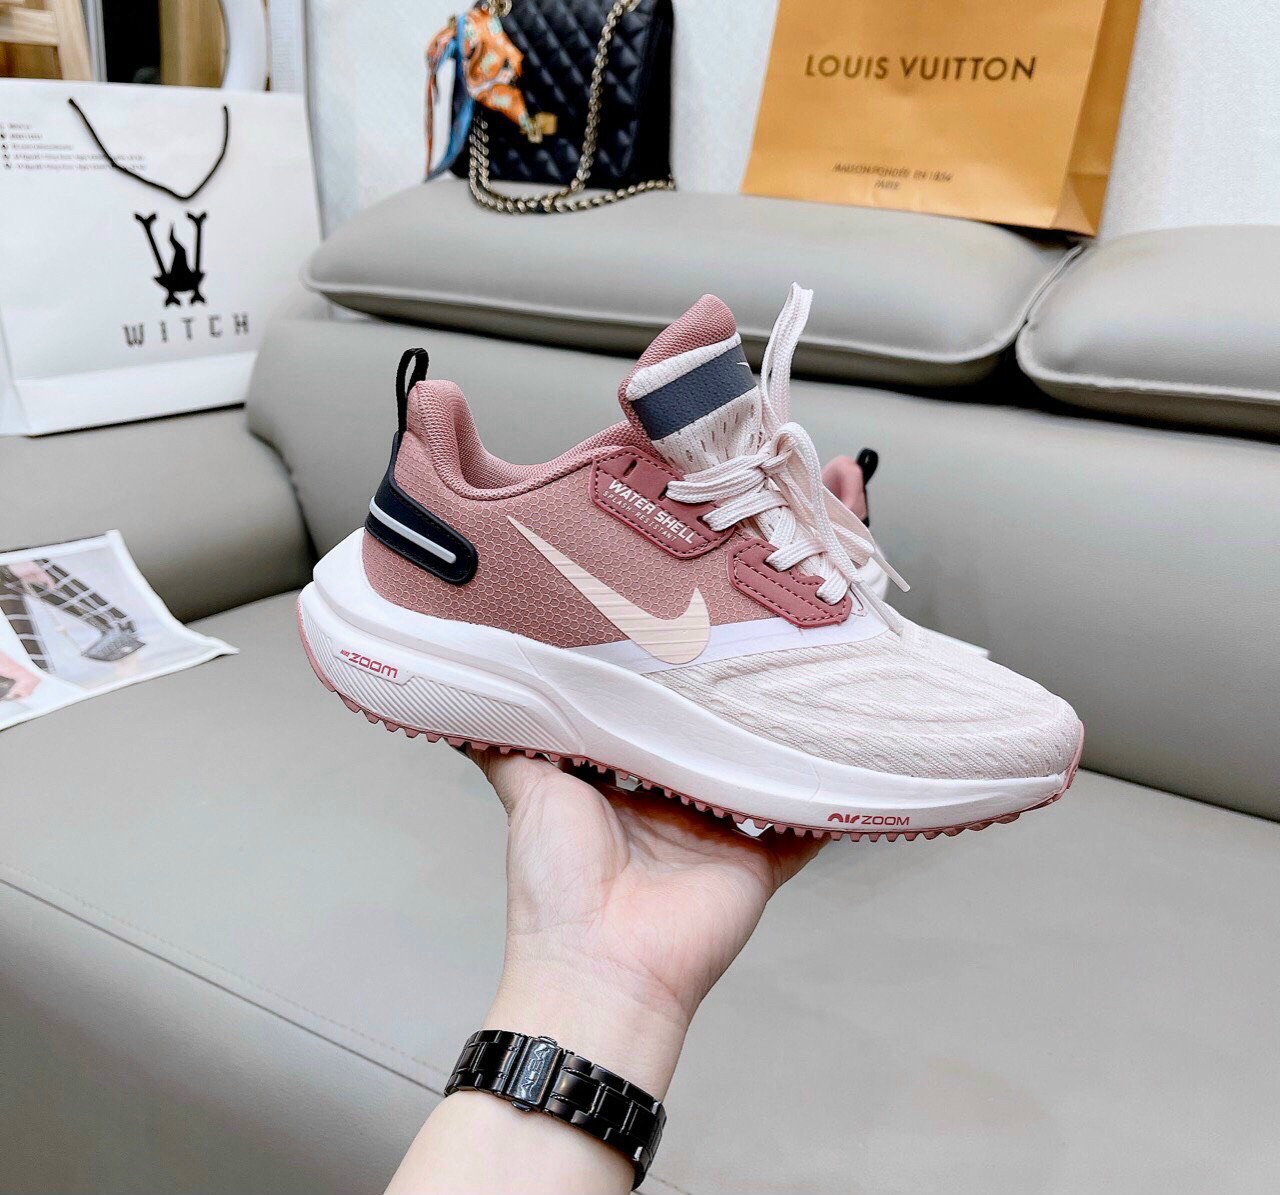 Giày Nike Zoom Water Shell Hồng Rep 1:1